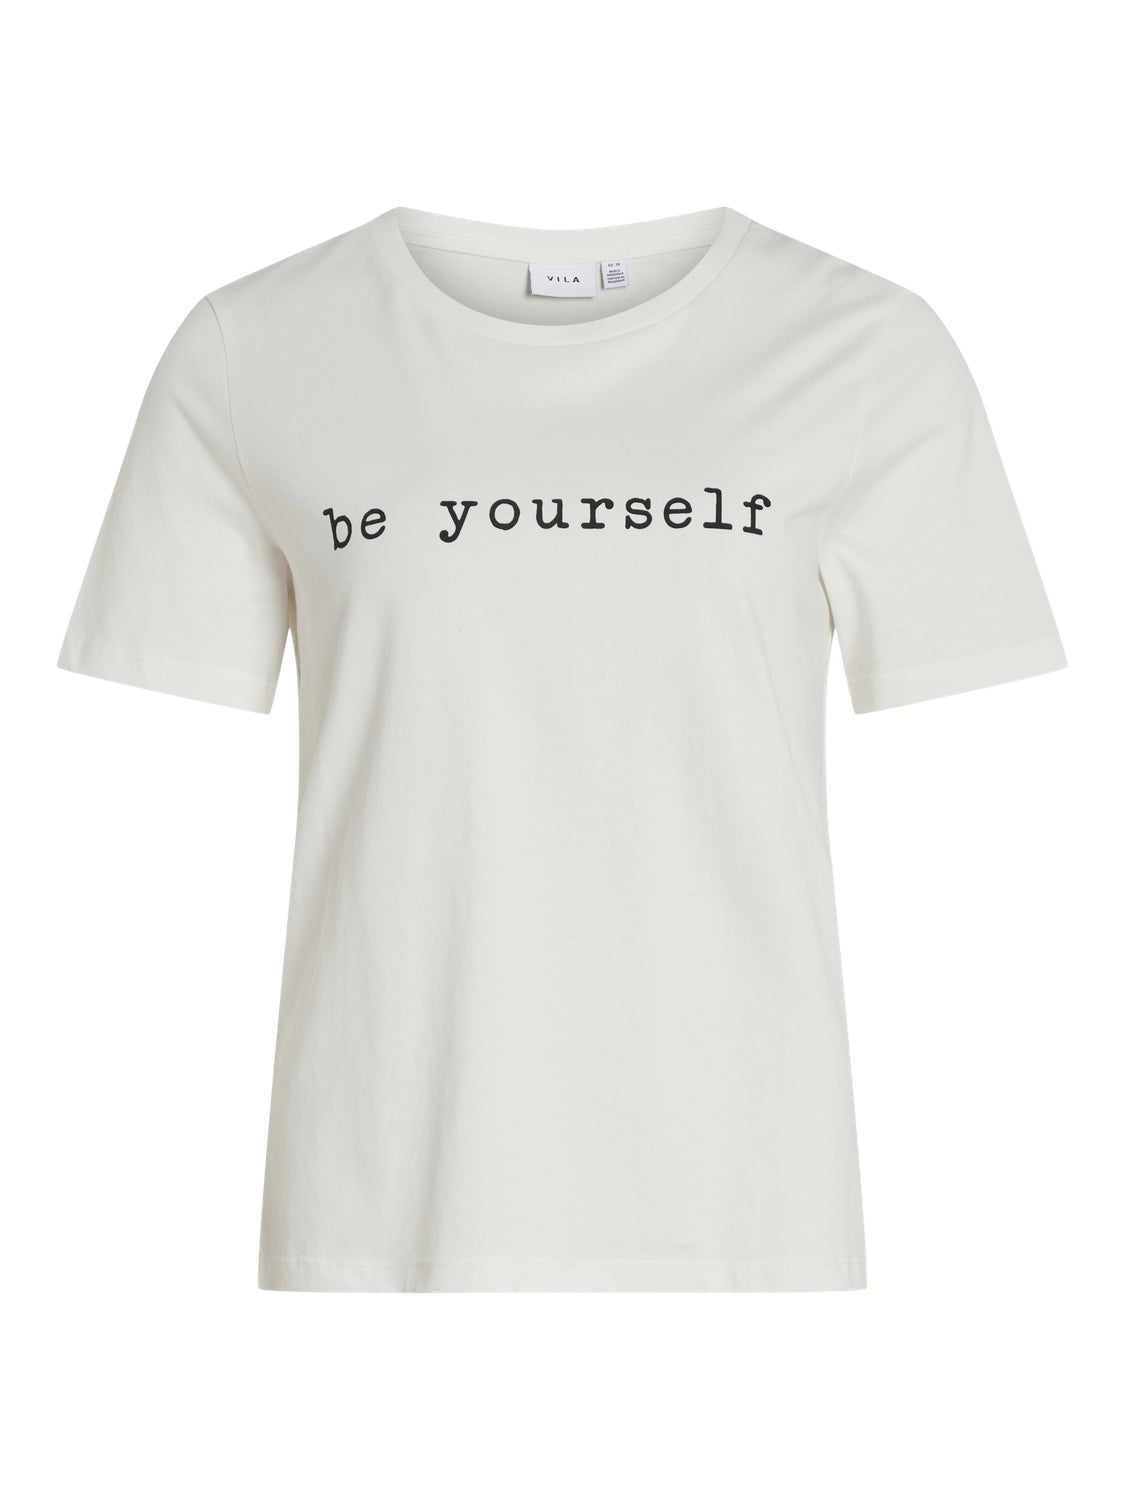 BE YOURSELF T-SHIRT (WHITE/BLACK)